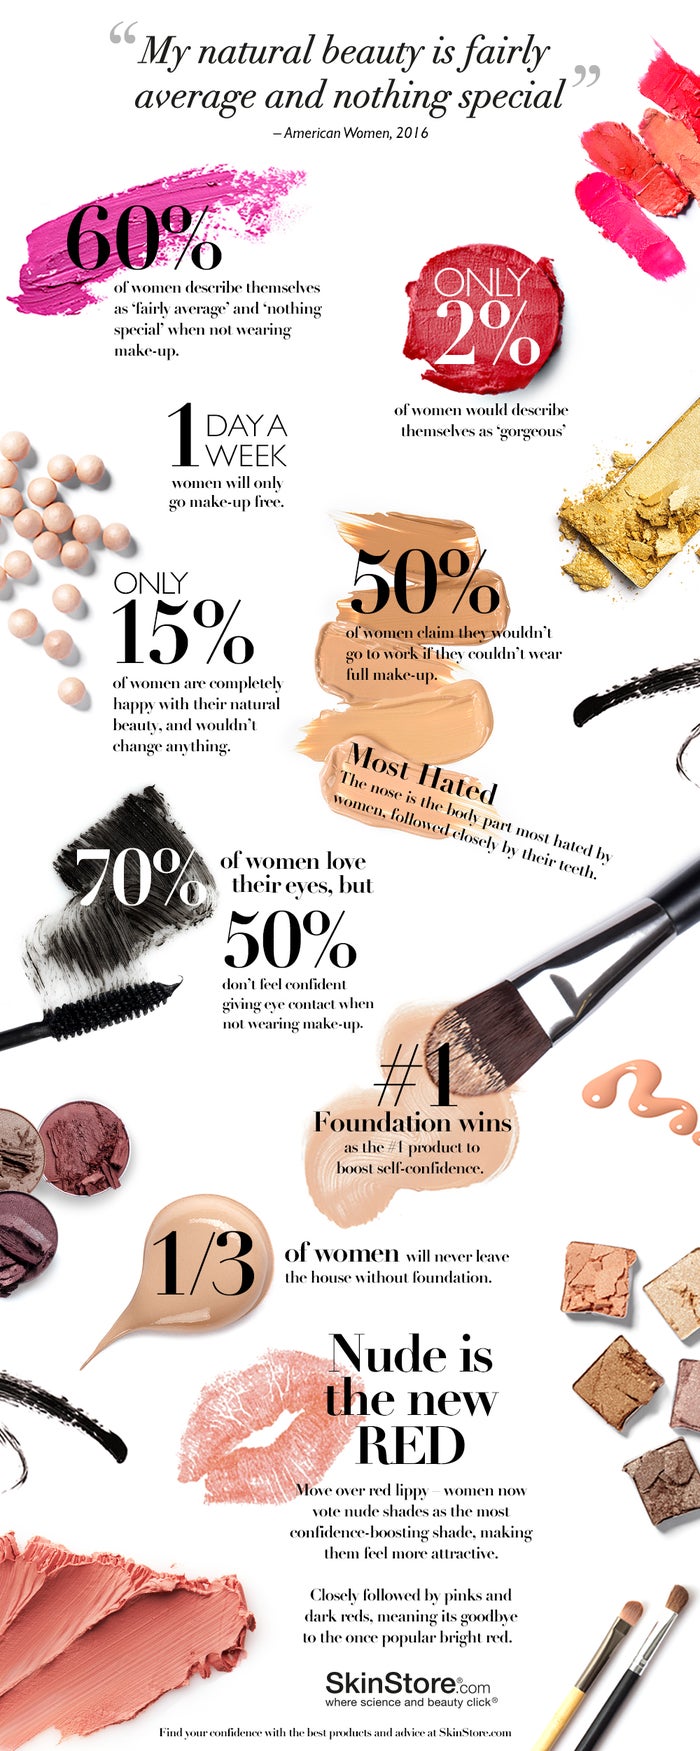 SkinStore Makeup and Self Confidence Infographic